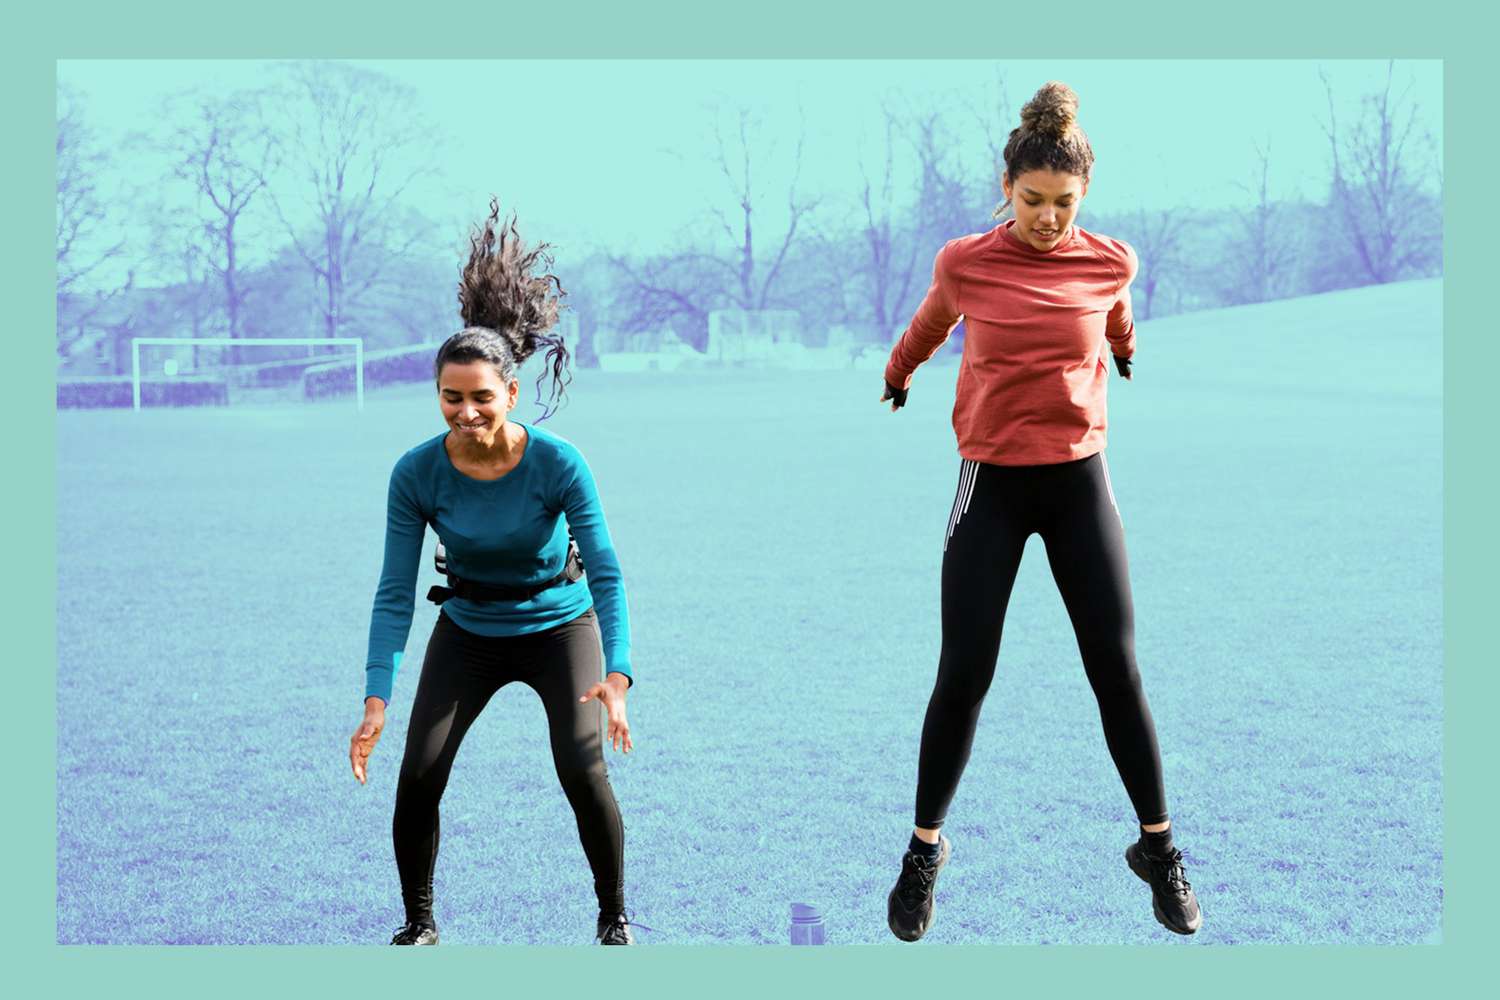 A diverse group of women exercising, jumping in the air doing burpees in a public park surrounded by nature. They are working out in their community to get exercise and spend quality time together.